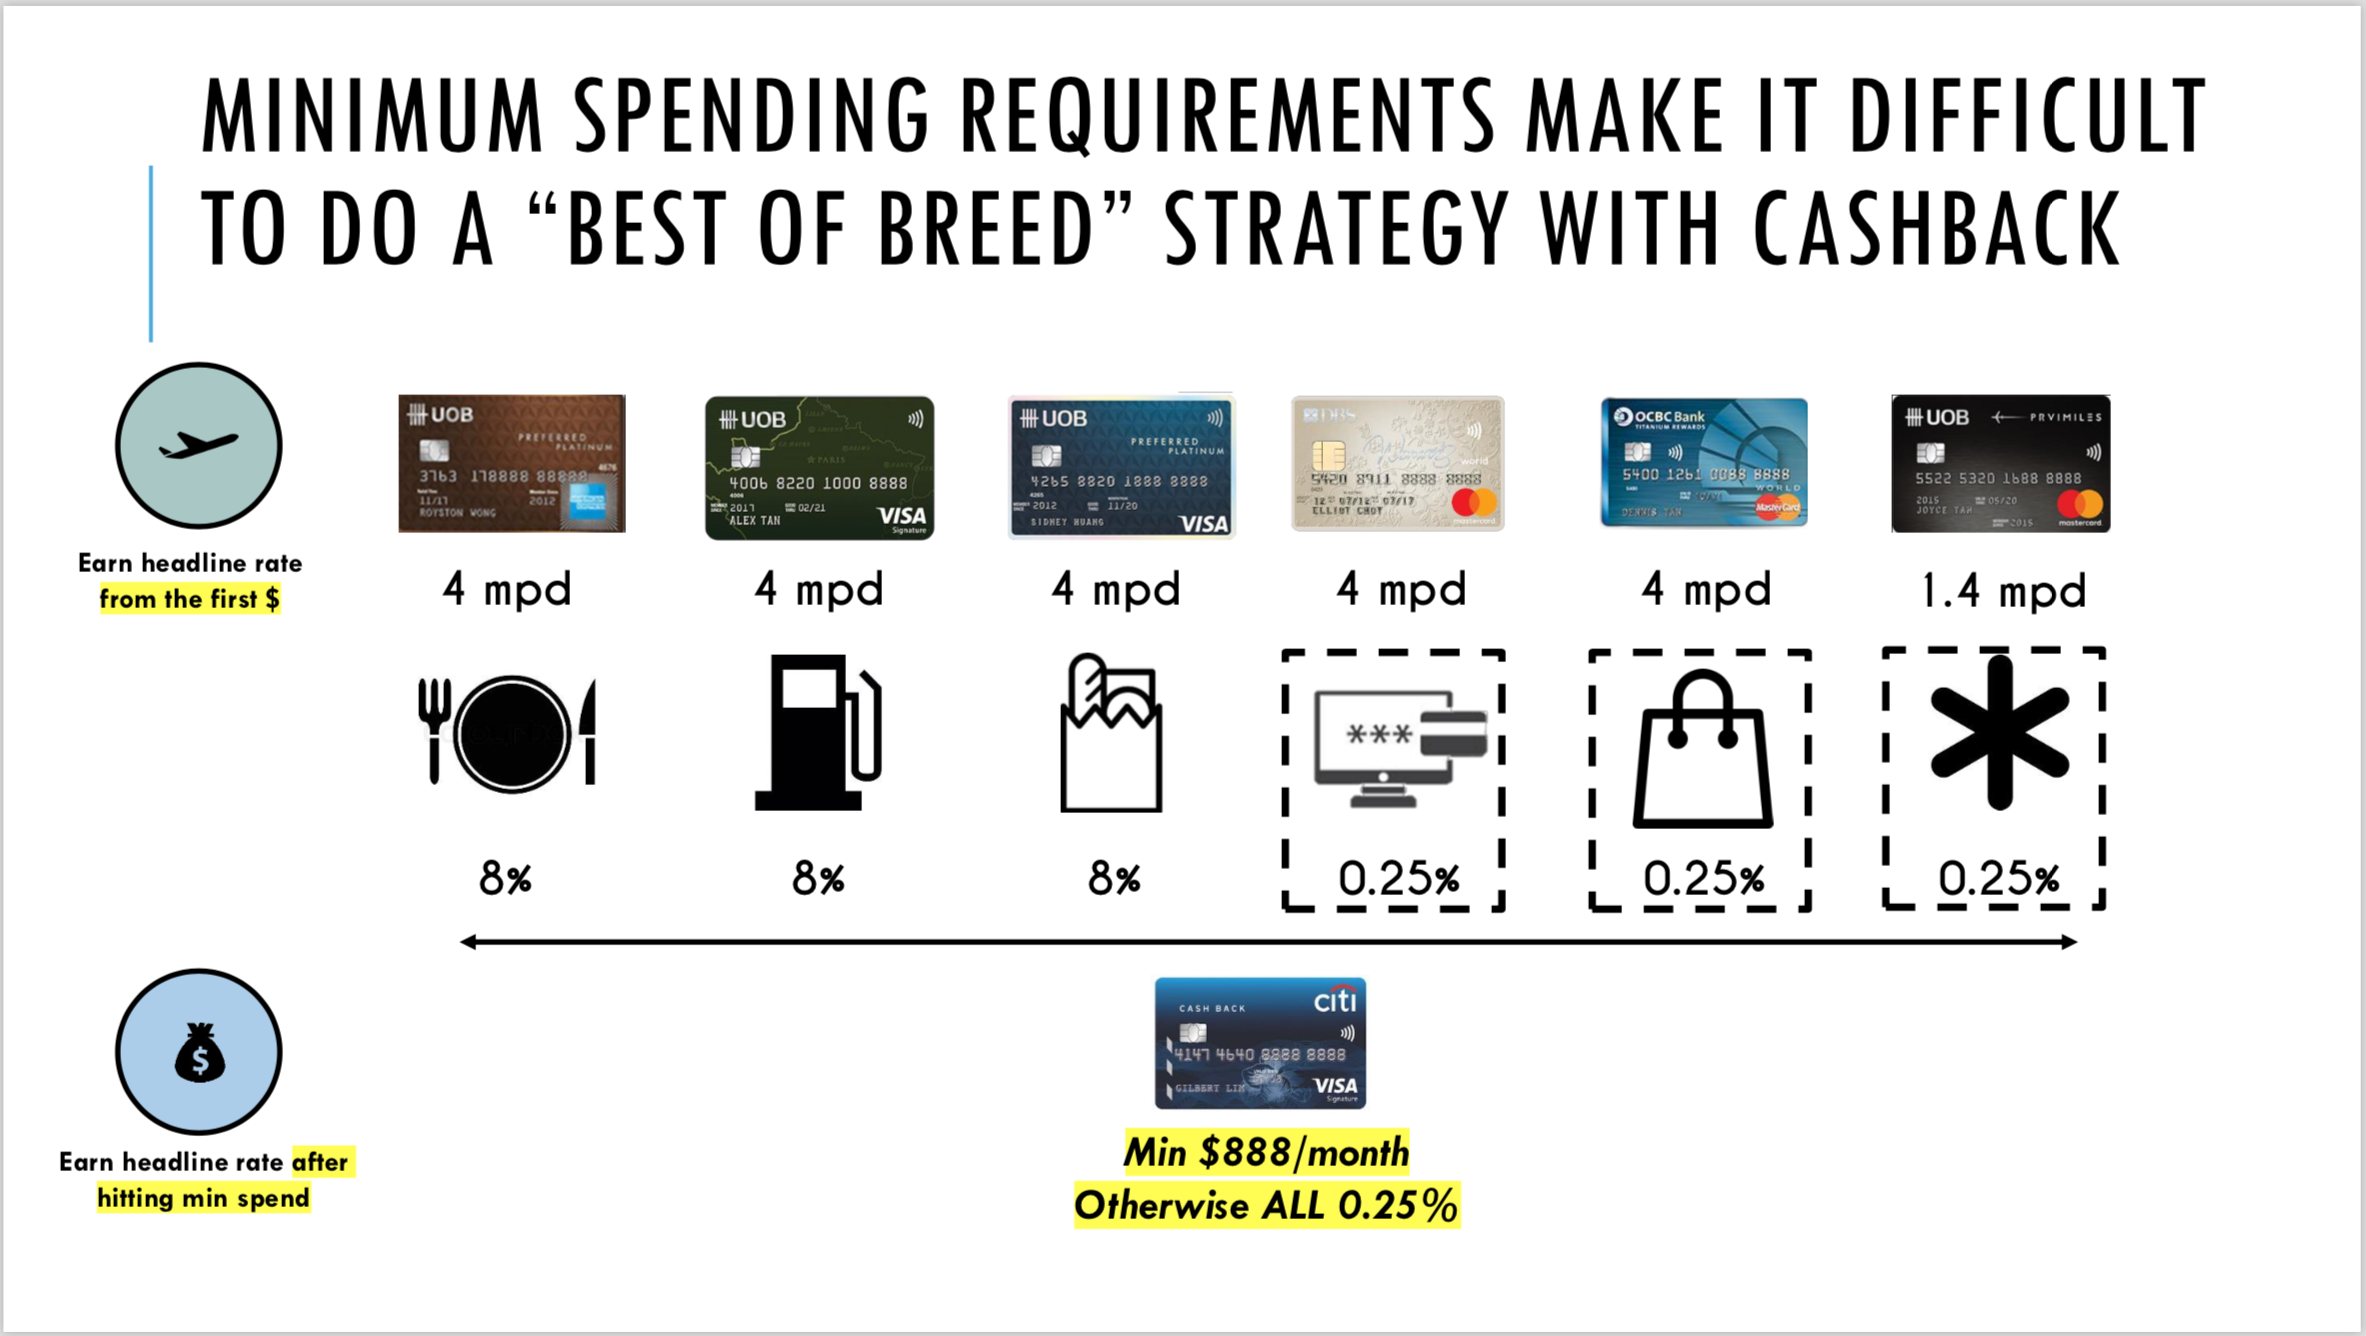 Cashback vs miles cards: Miles cards allow you to optimise your spend from the first dollar. Cashback cards require a minimum spend first. (Source: Aaron Wong)